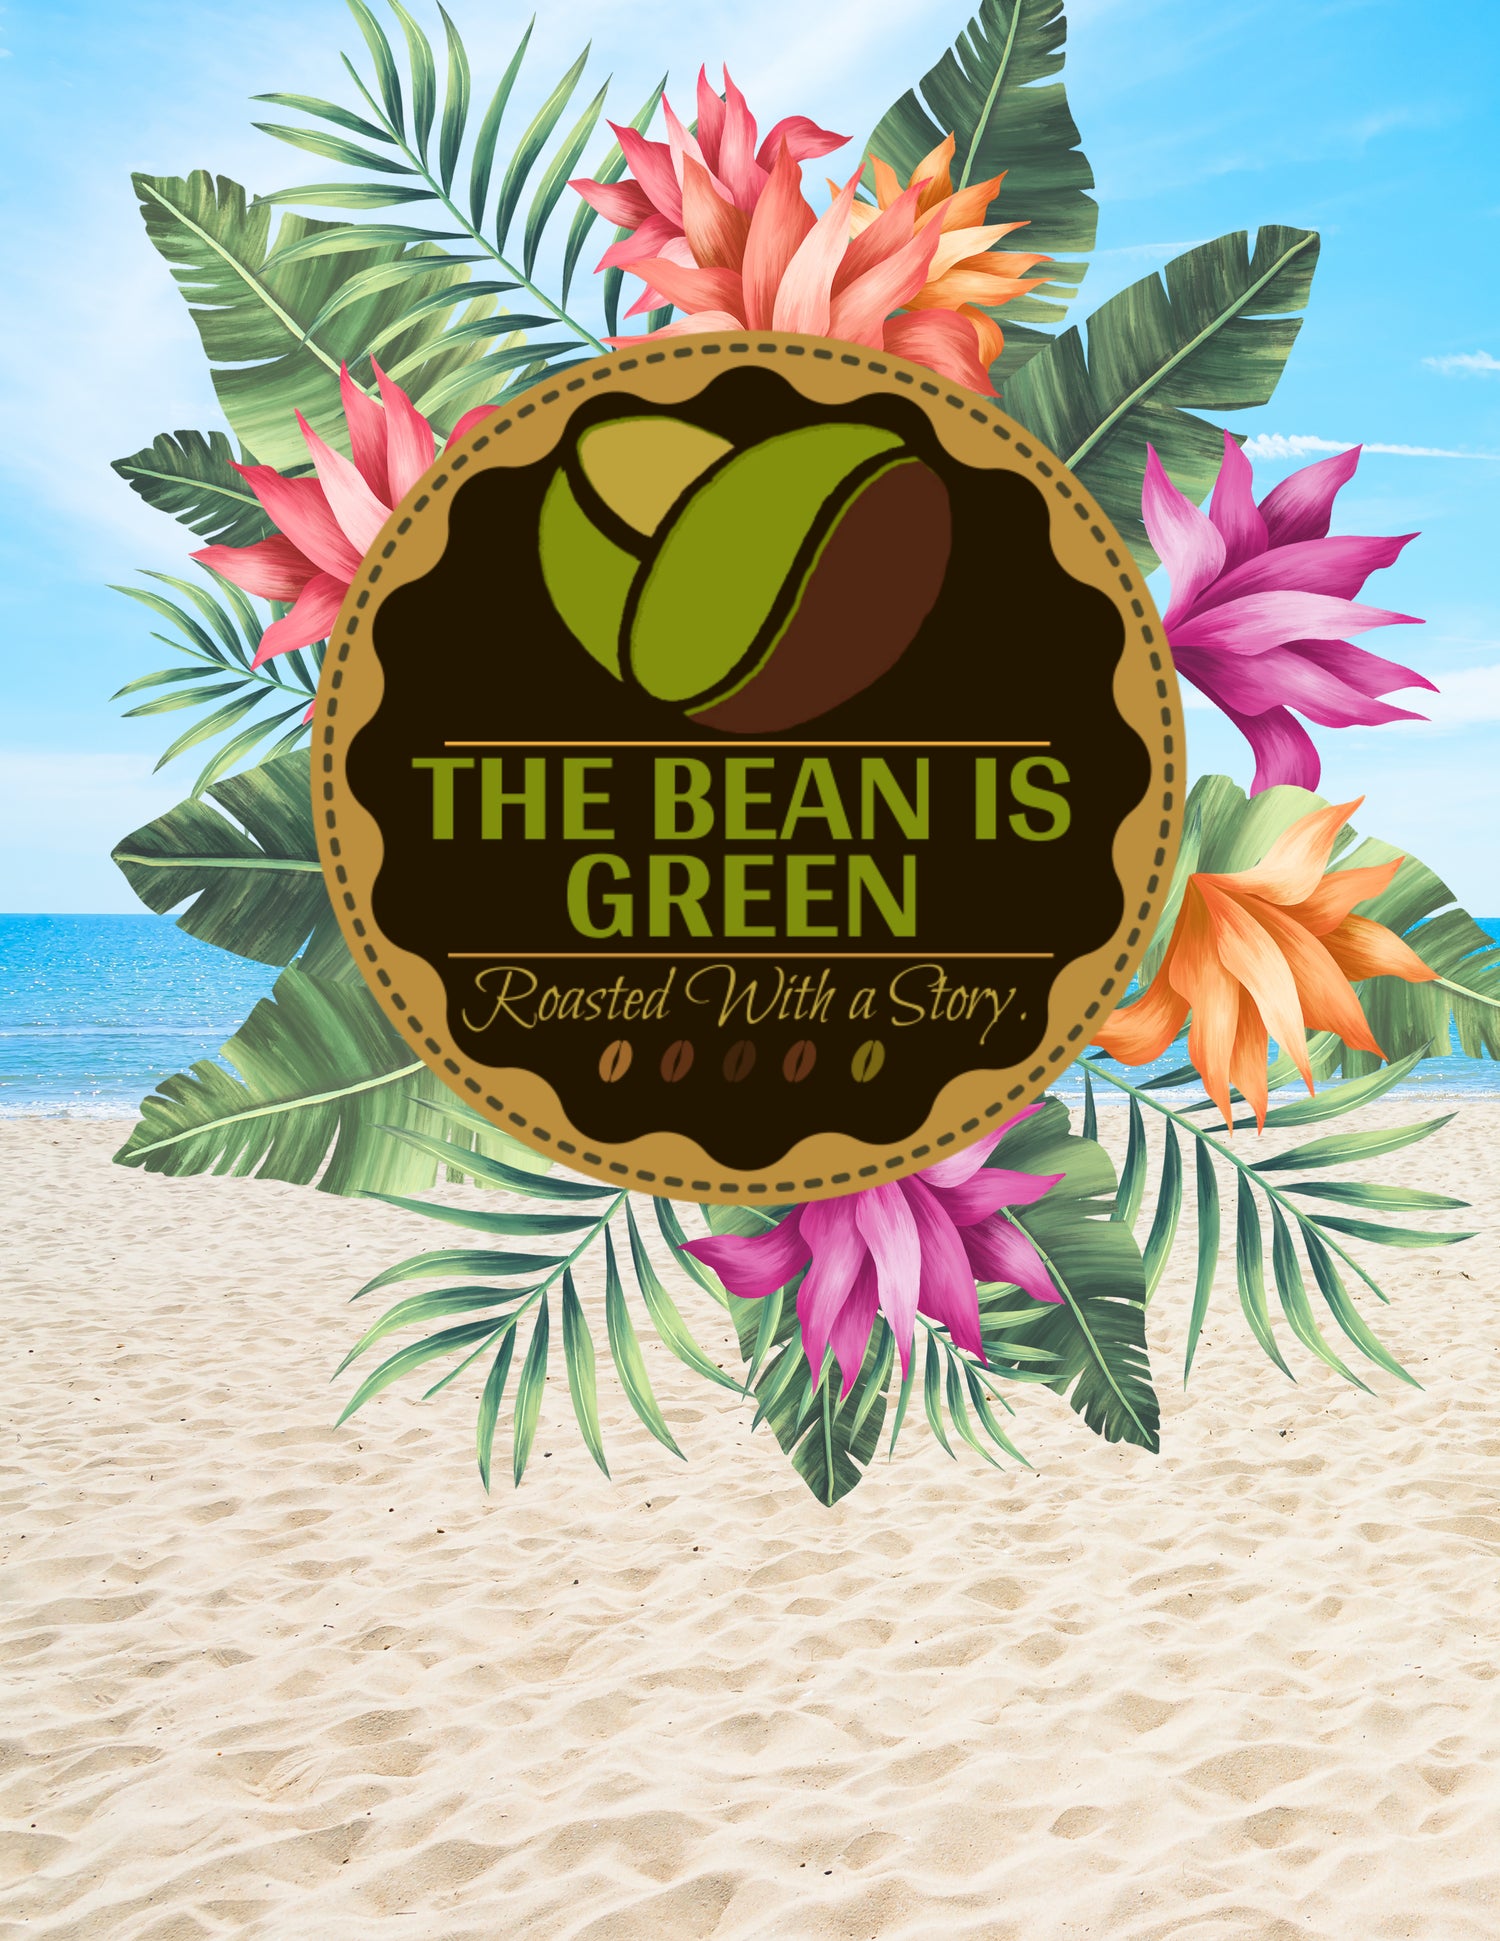 The Bean Is Green Customized Tropical Logo in color. Temporary photo not product picture.